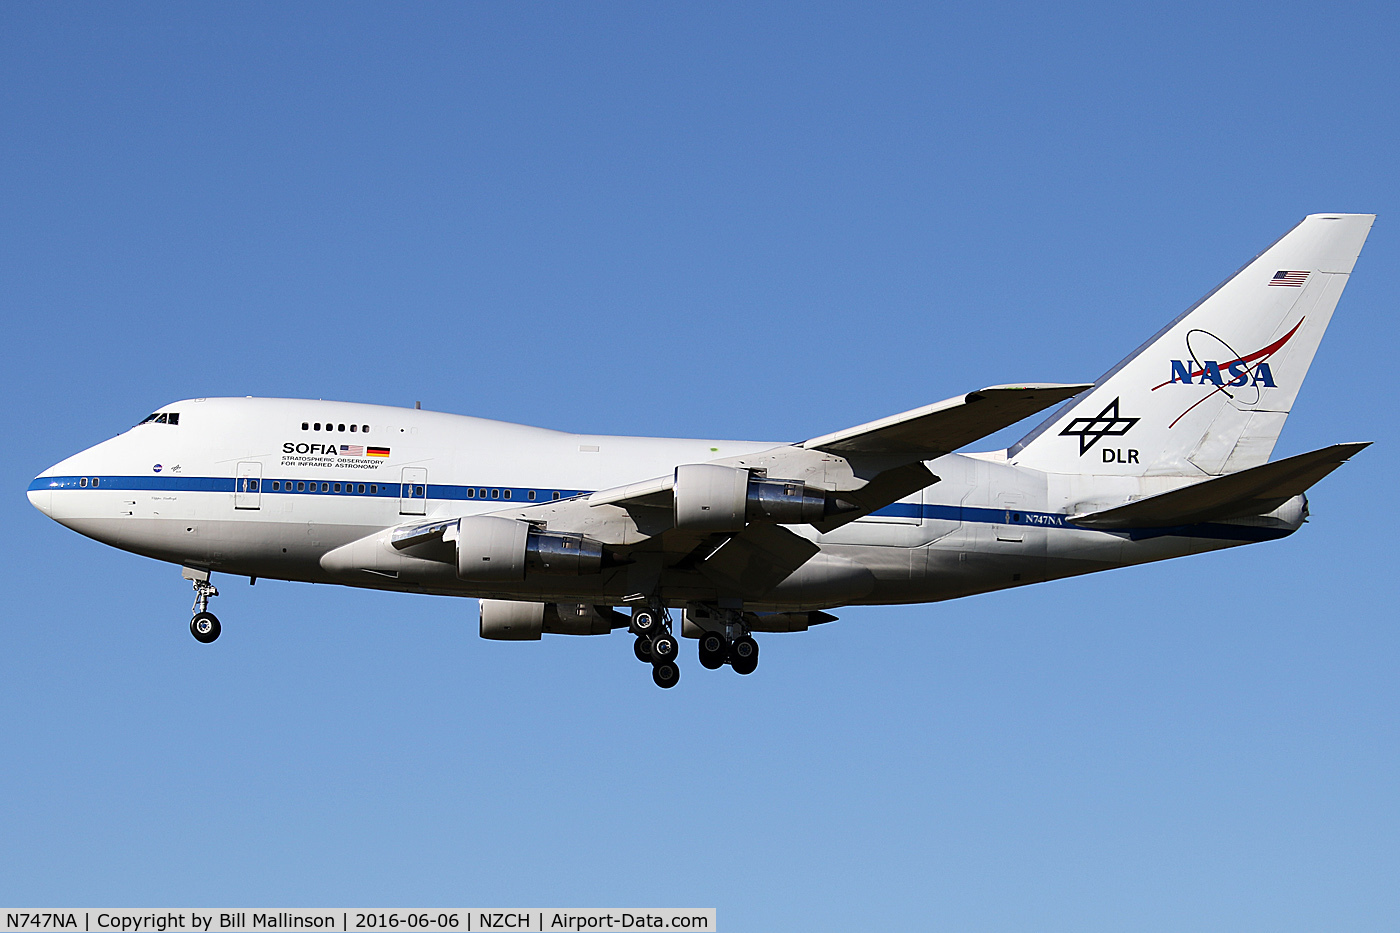 N747NA, 1977 Boeing 747SP-21 C/N 21441, INTO NZ FOR ITS NEXT MISSION